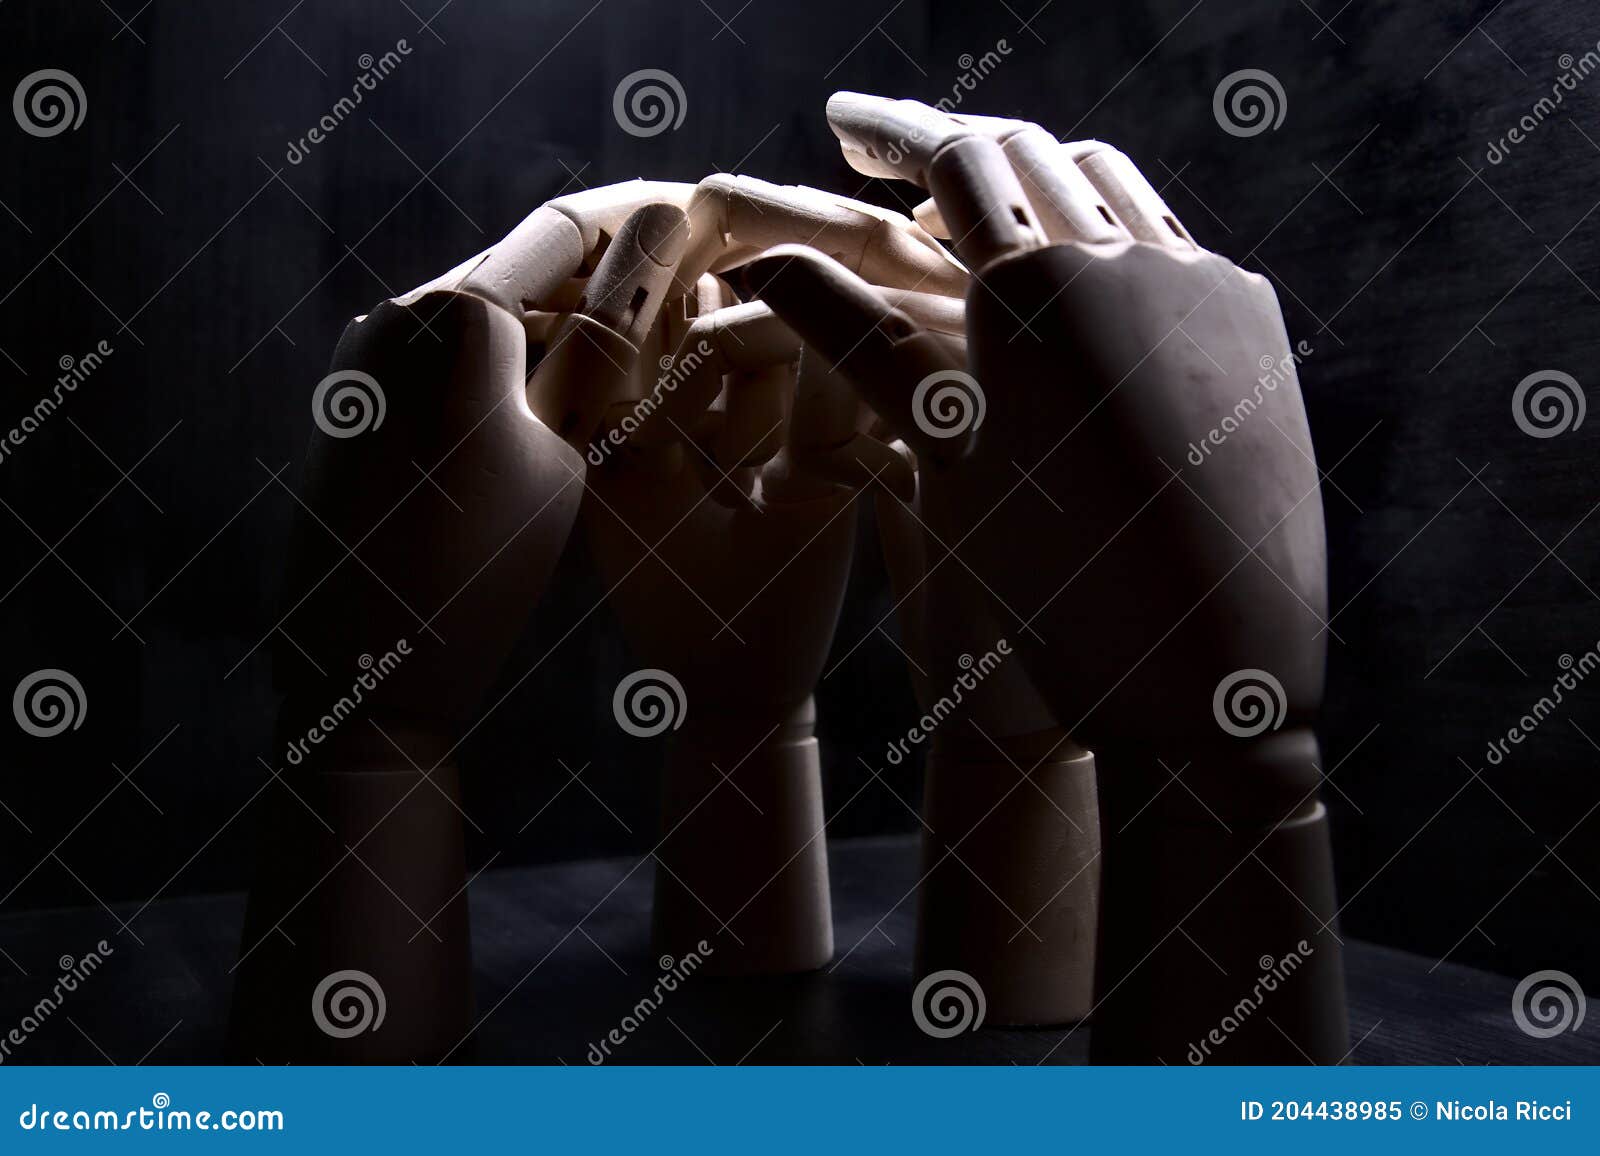 Two Closed Wooden Hands in a Shy Stance while Two Other Hands are ...